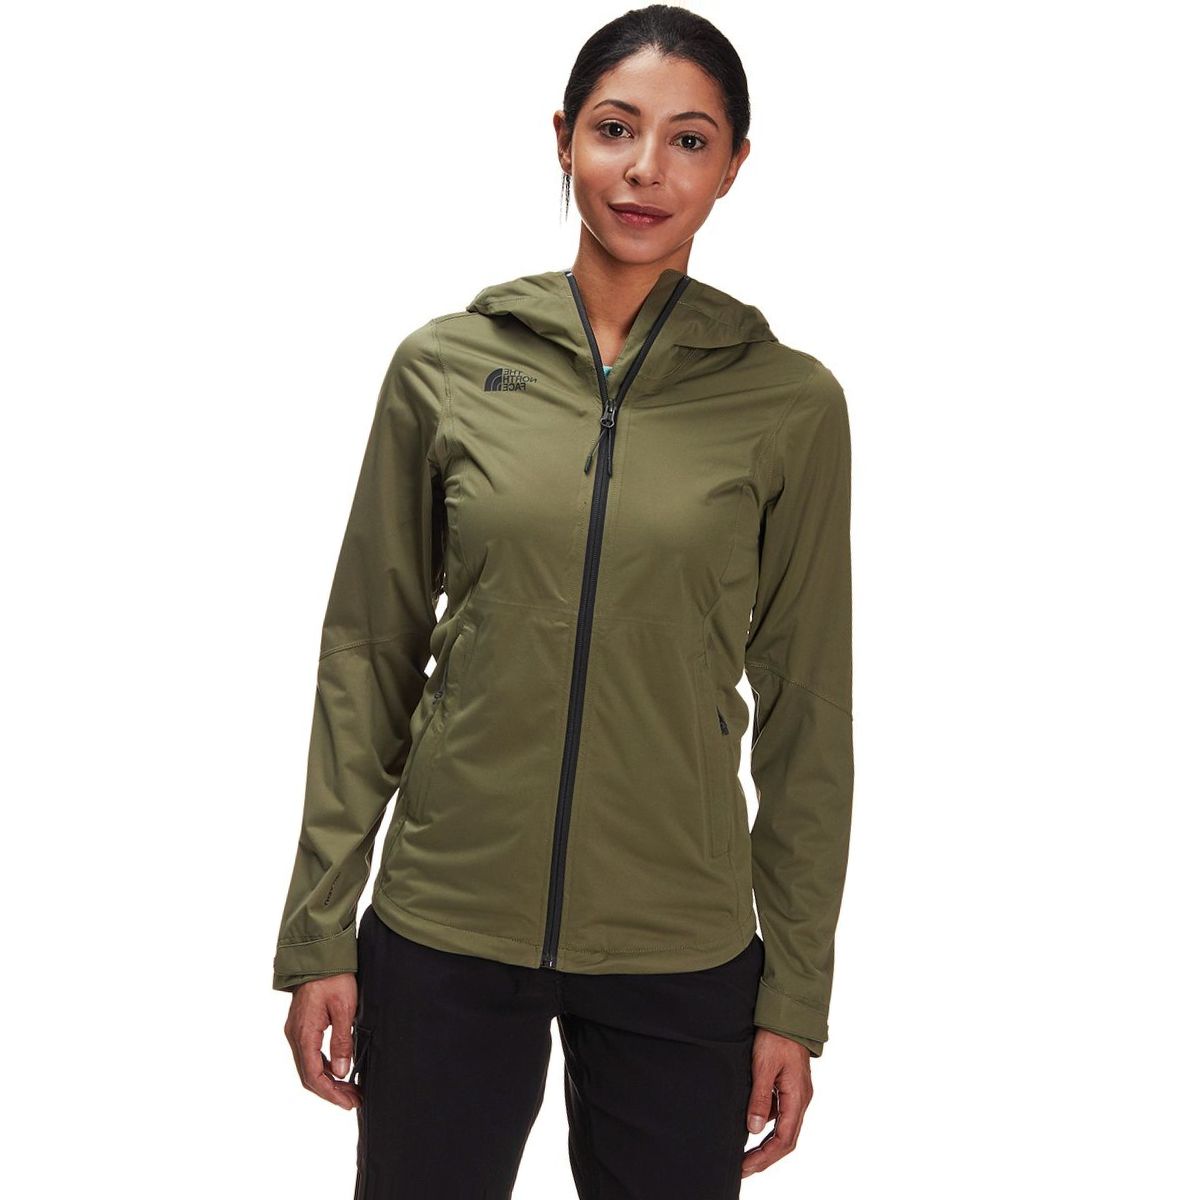 The North Face Allproof Stretch Jacket - Women's